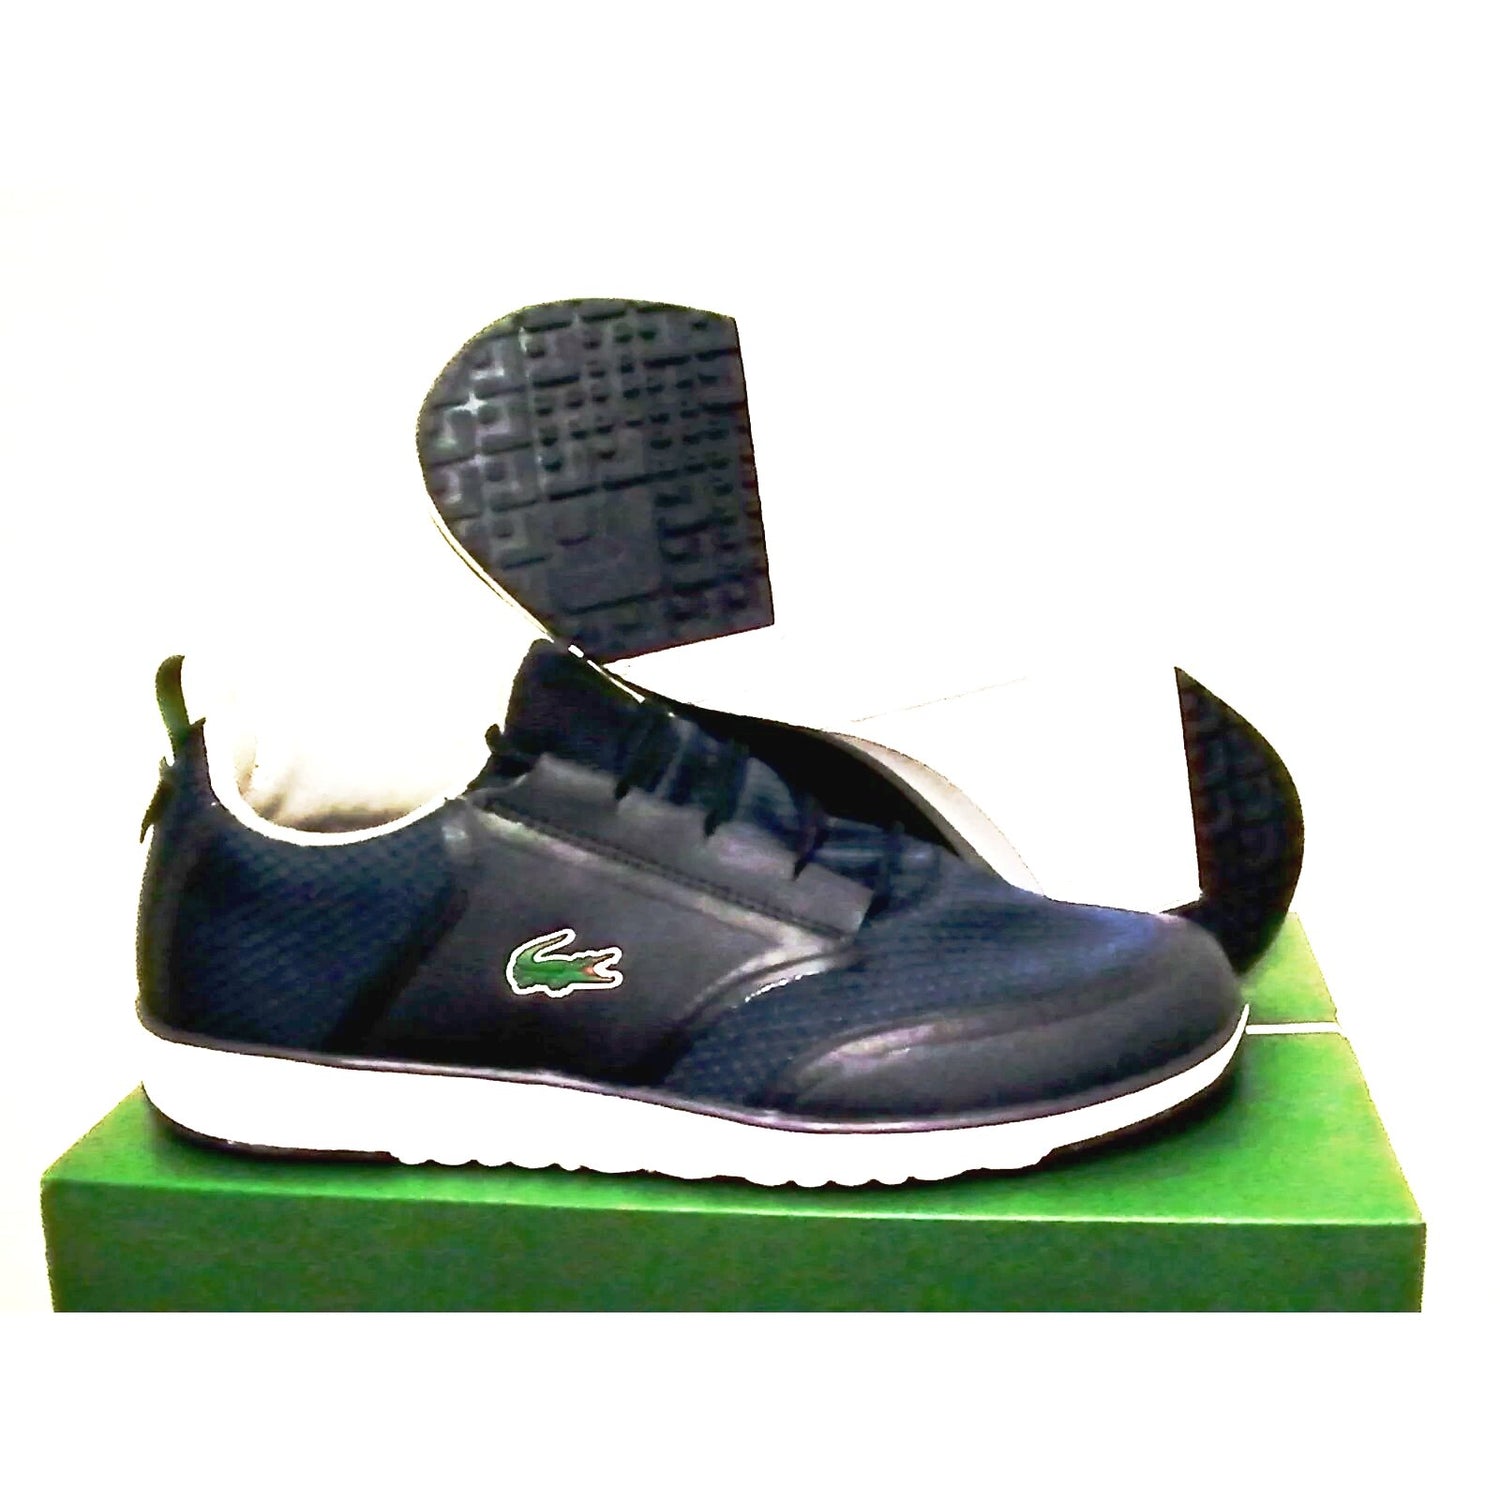 Lacoste shoes L.IGHT LT12 spm txt/syn dark blue training size 8 new with box